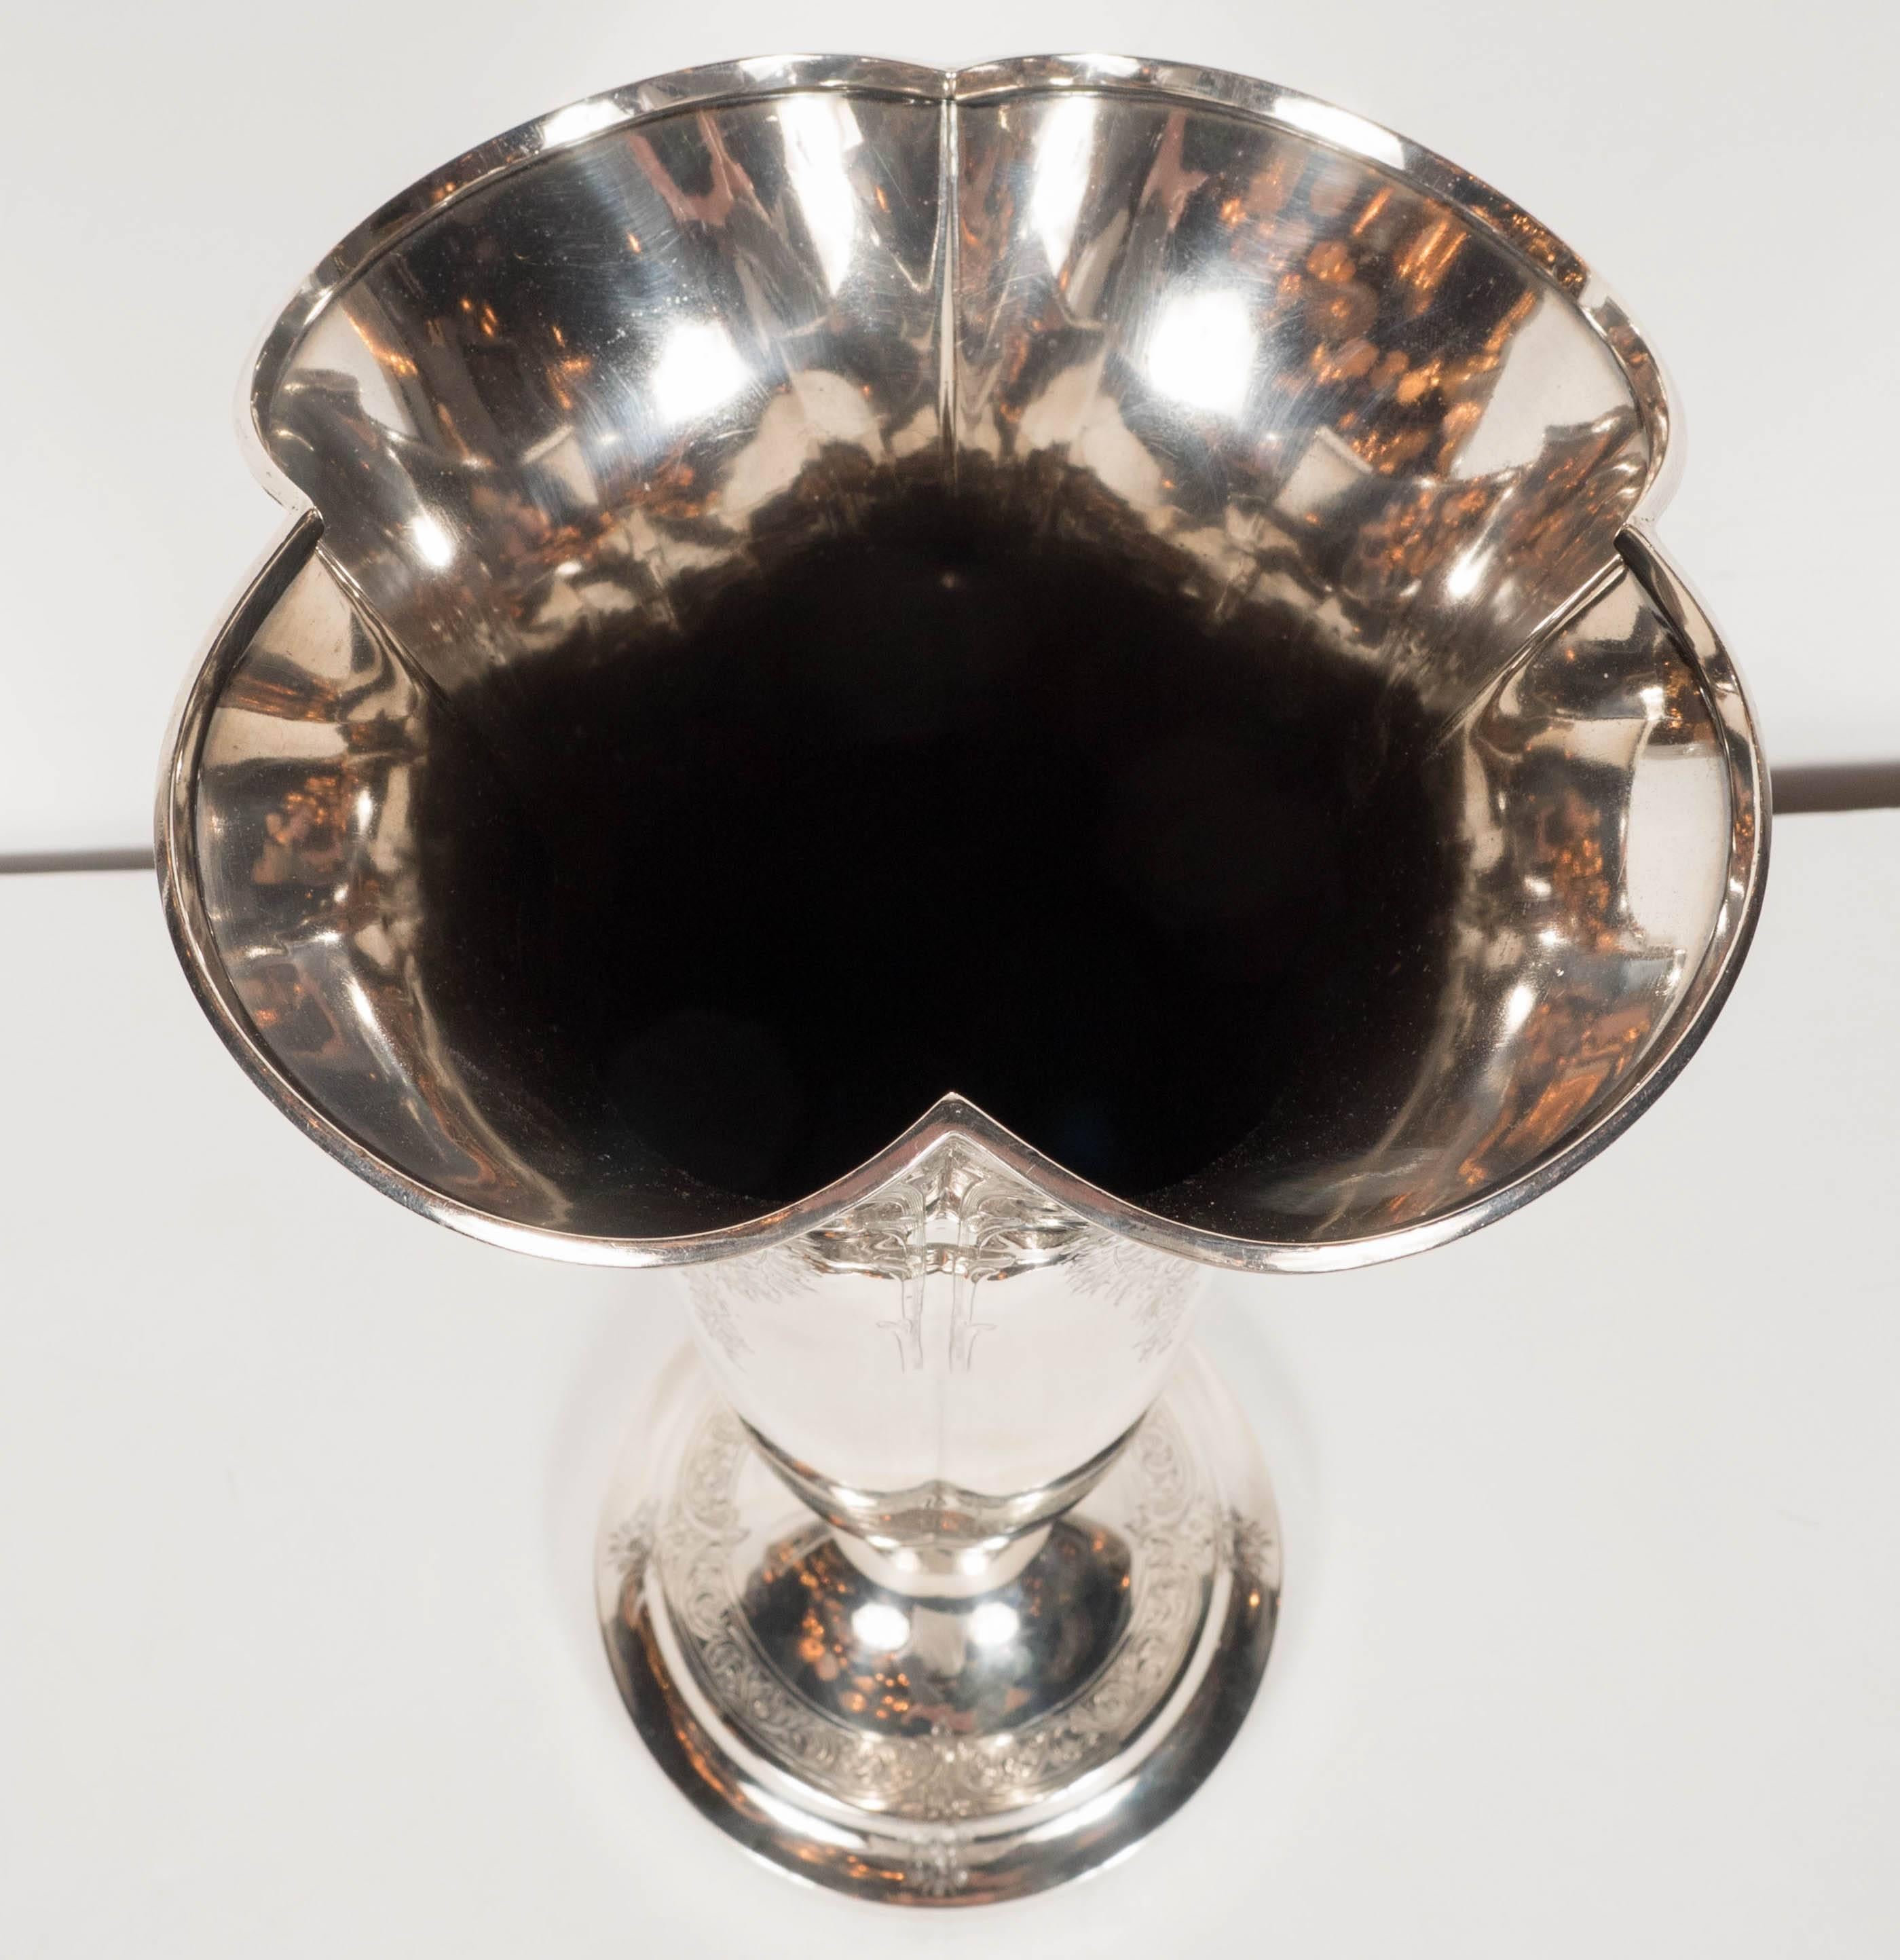 American Magnificent Edwardian Trumpet Vase in Sterling Silver by Howard and Co.